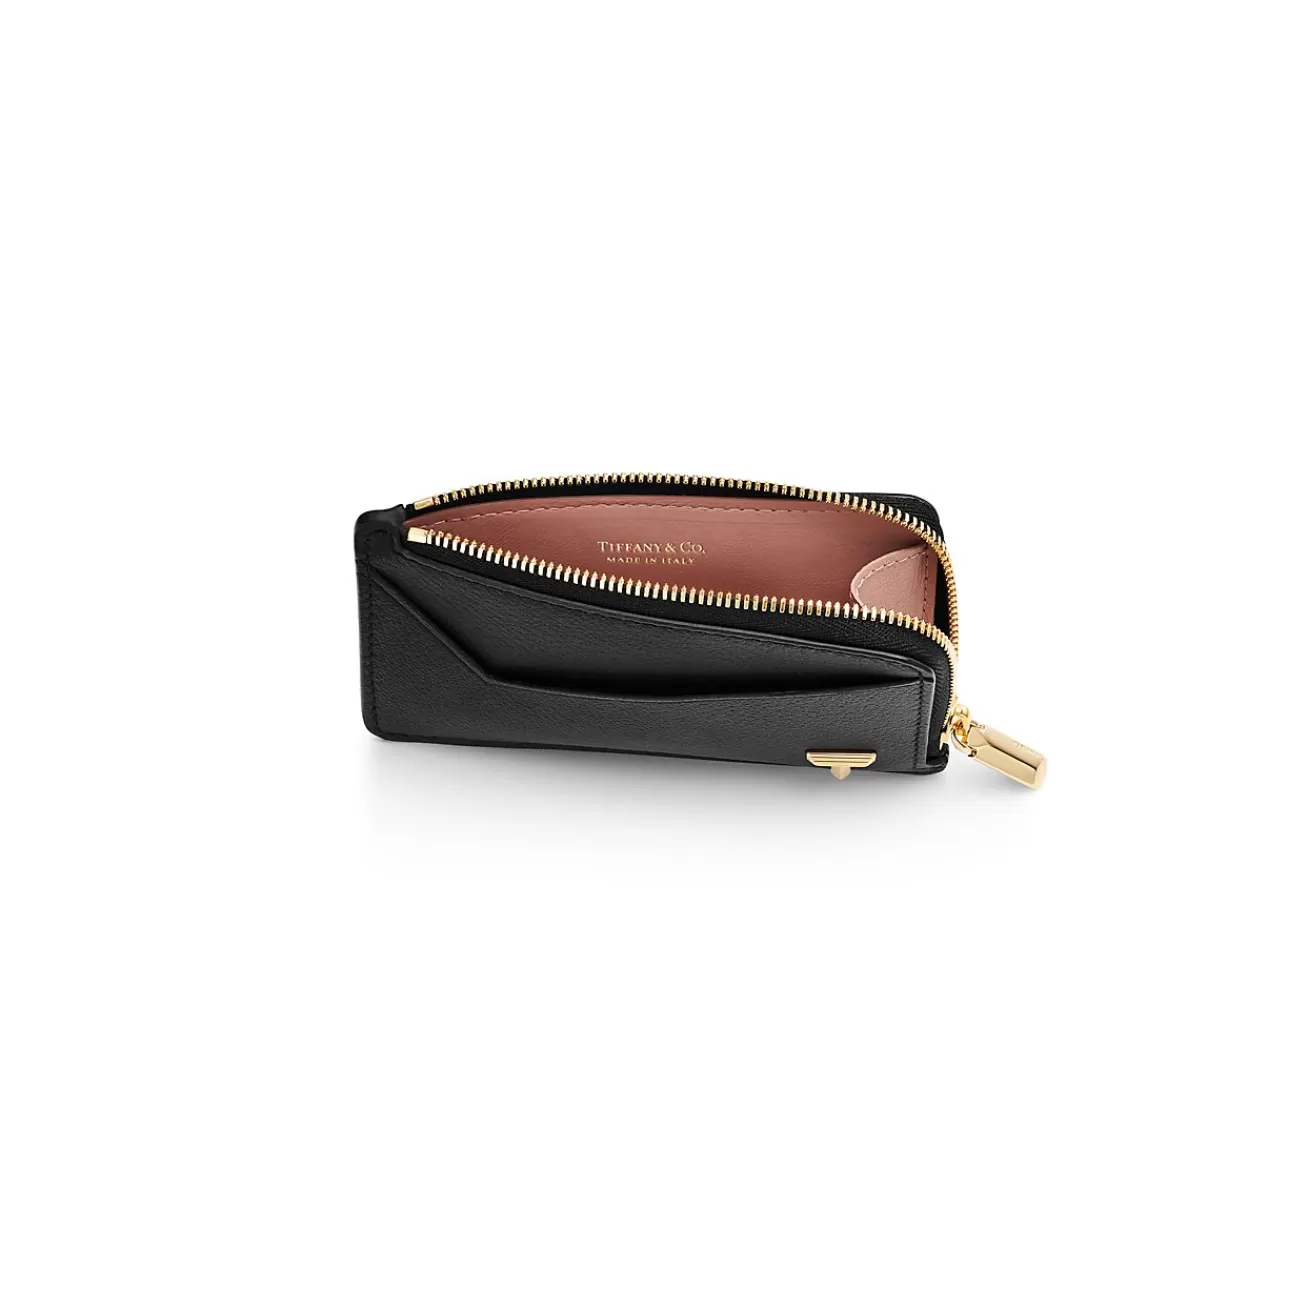 Tiffany & Co. Tiffany T Zip Card Case in Black Leather | ^Women Small Leather Goods | Women's Accessories